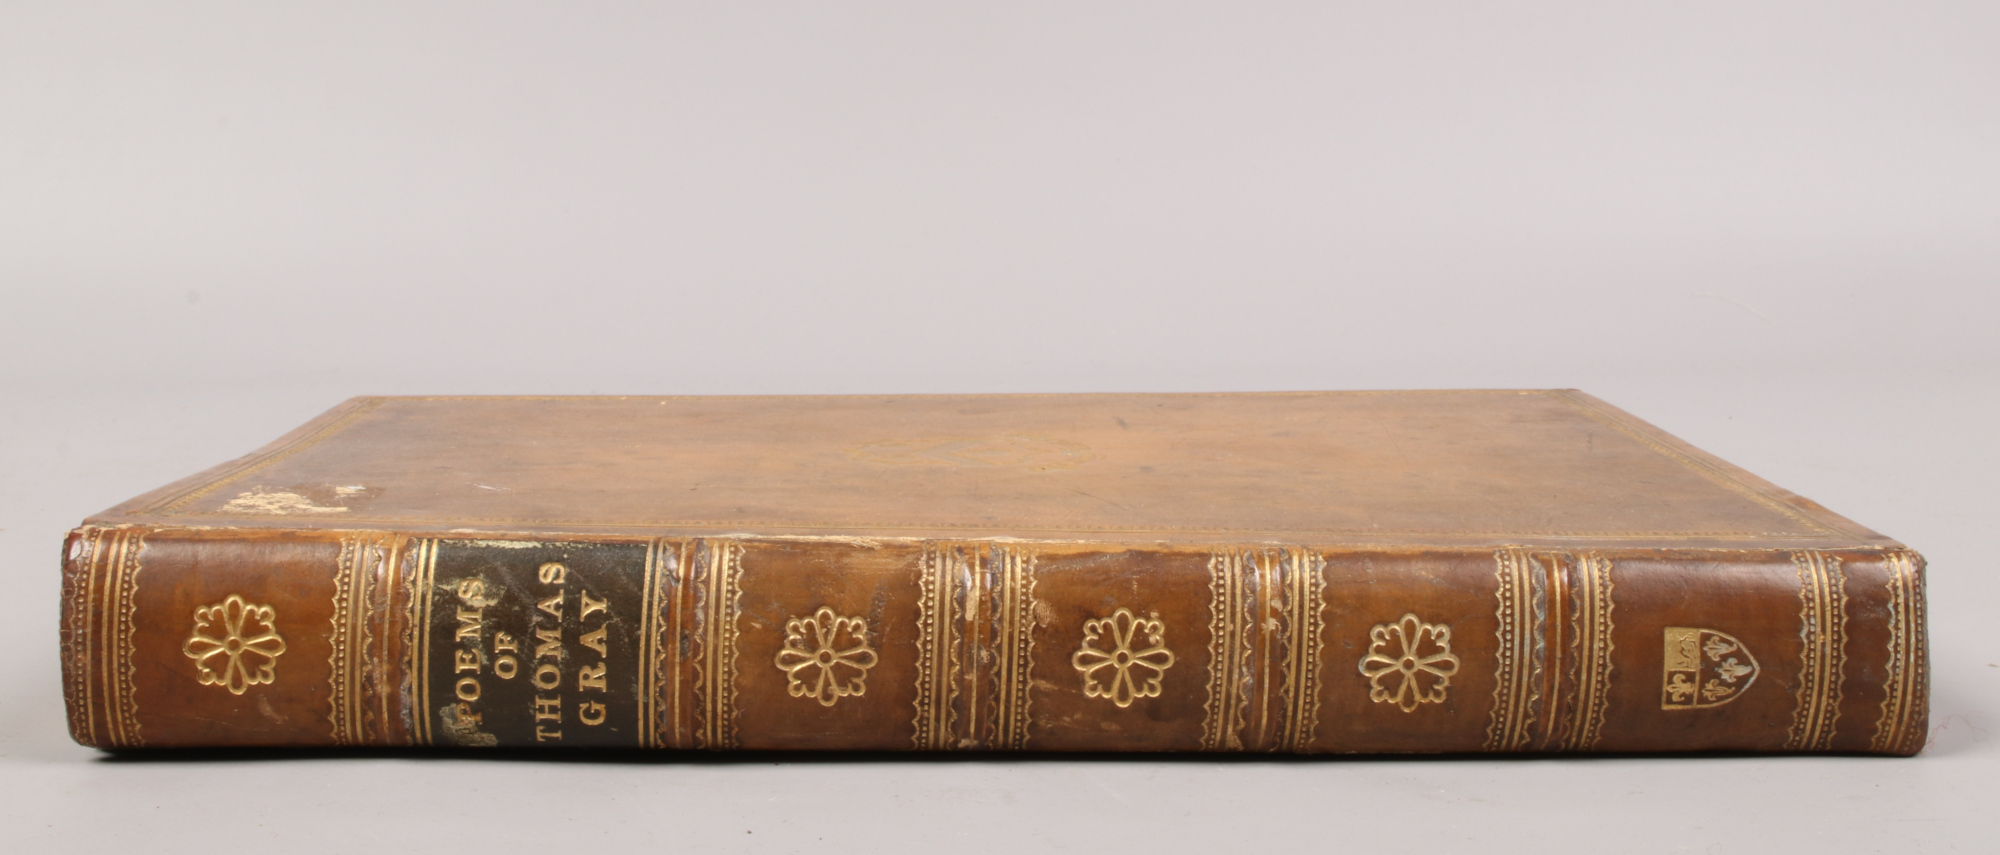 Poems of Thomas Gray leather bound edition Eton College, Spottiswoode & Co 1907. Book plate for